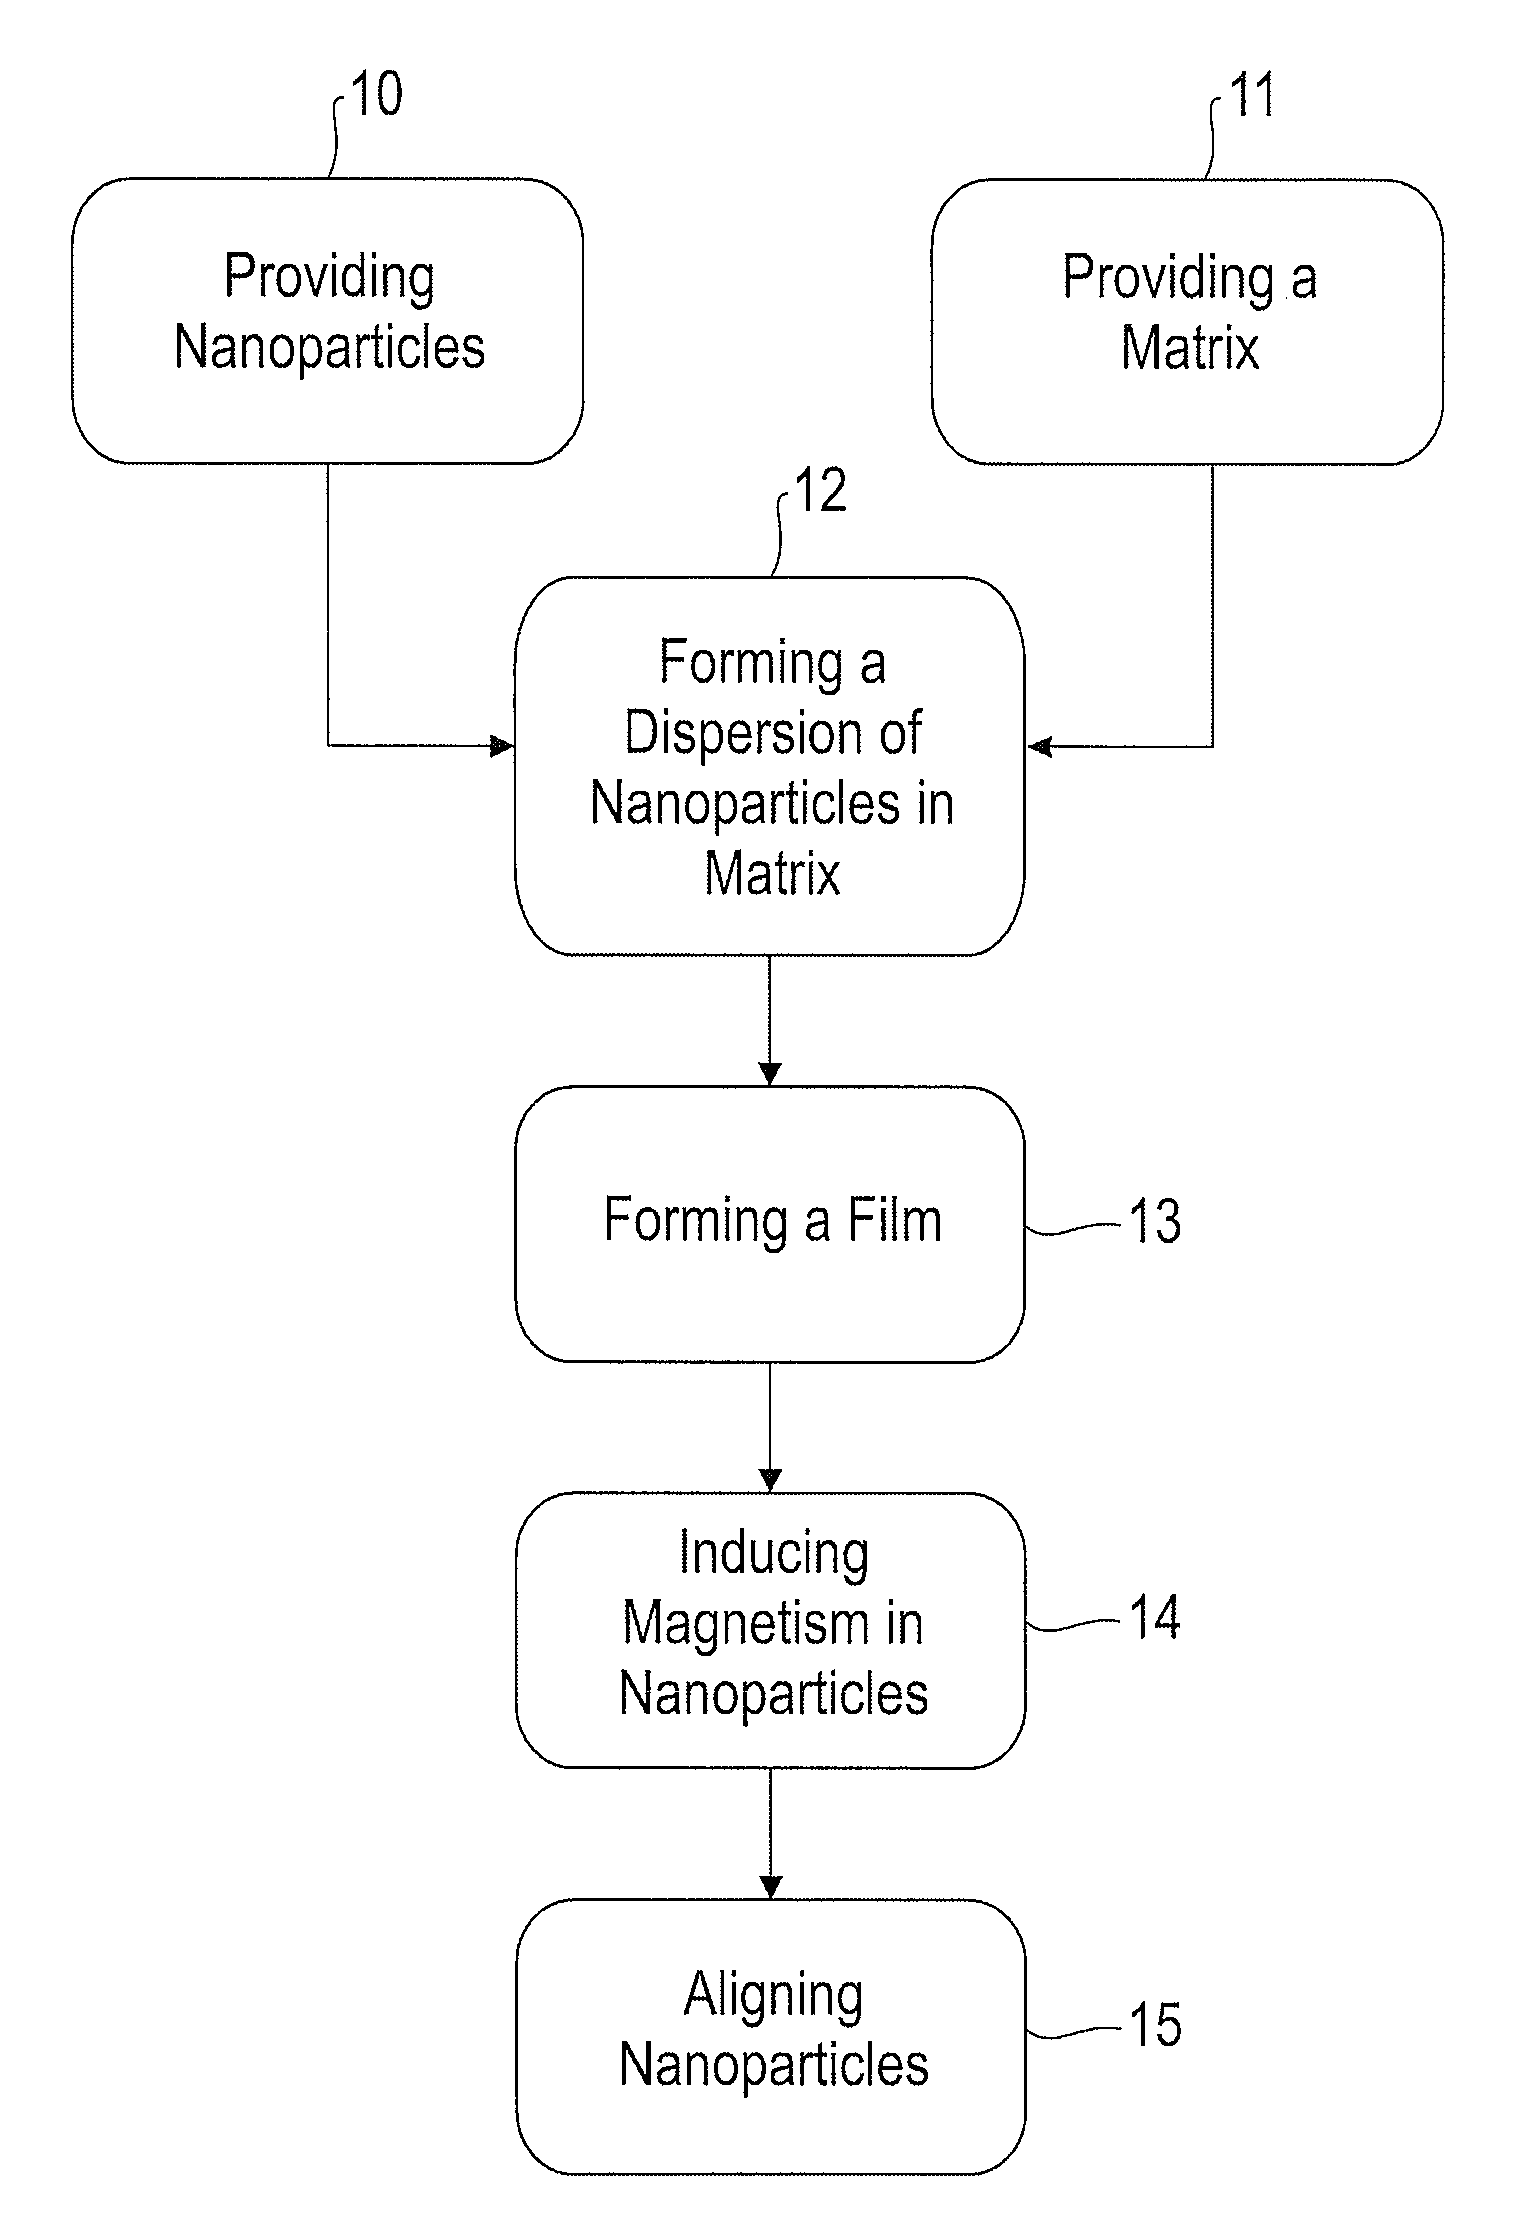 Method for forming and aligning chemically mediated dispersion of magnetic nanoparticles in a polymer